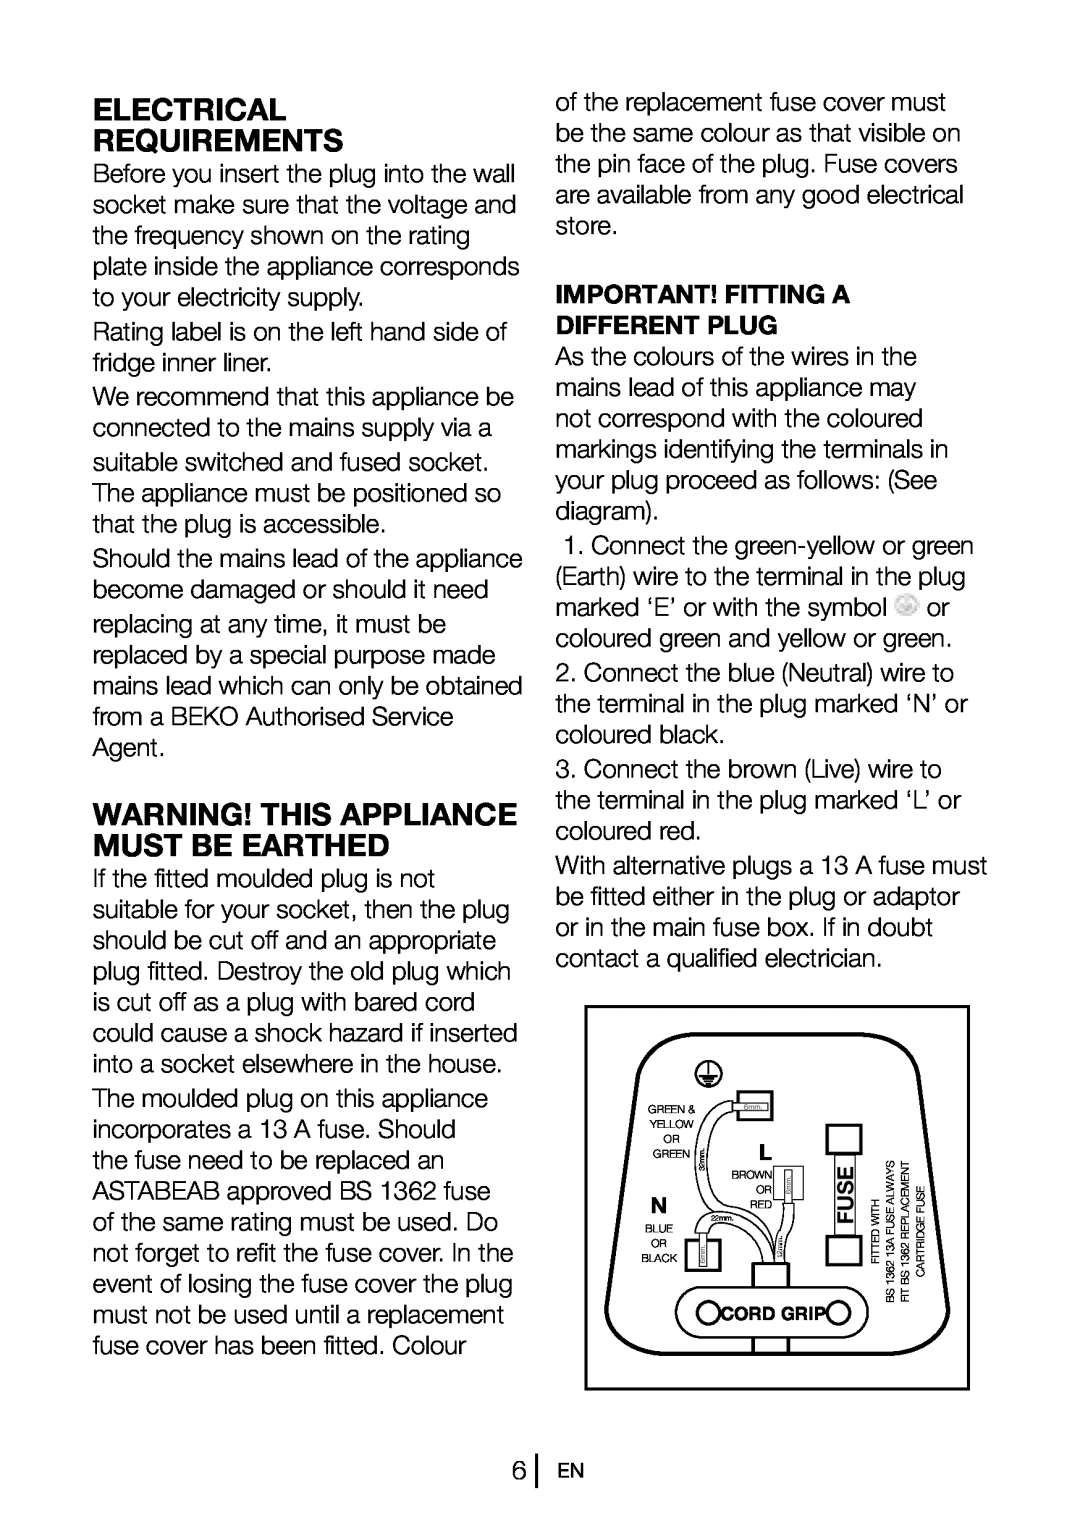 Beko CS 6914 APW Electrical Requirements, Warning! This Appliance Must Be Earthed, Important! Fitting A Different Plug 